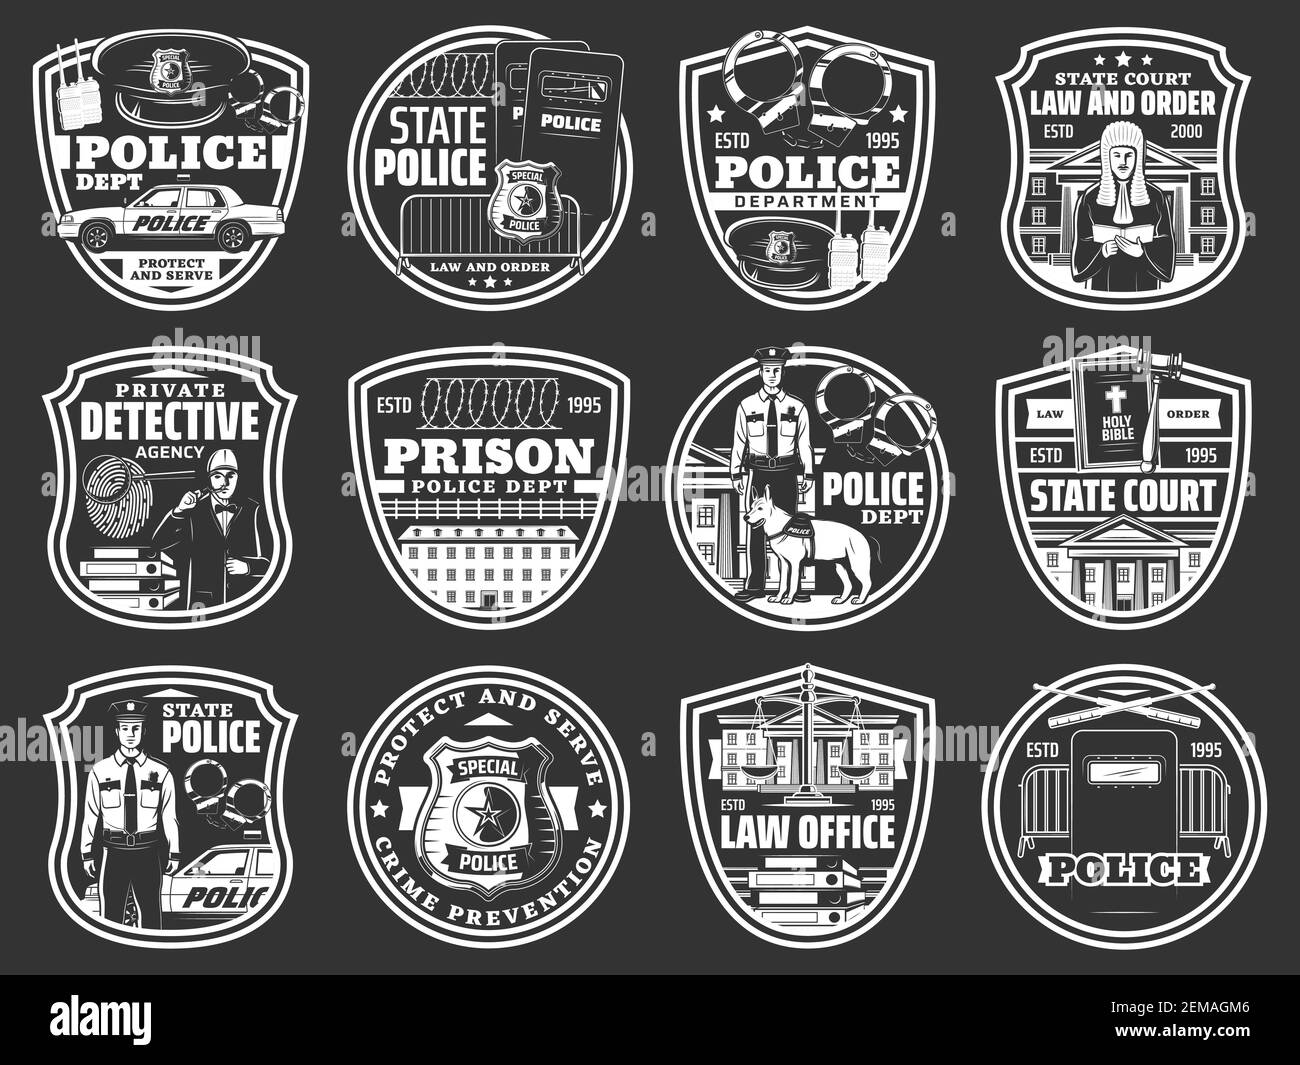 Law and order icons of vector police, law office, detective, prison and court design. Police officer, jail and court, judge gavel, sheriff badge, poli Stock Vector